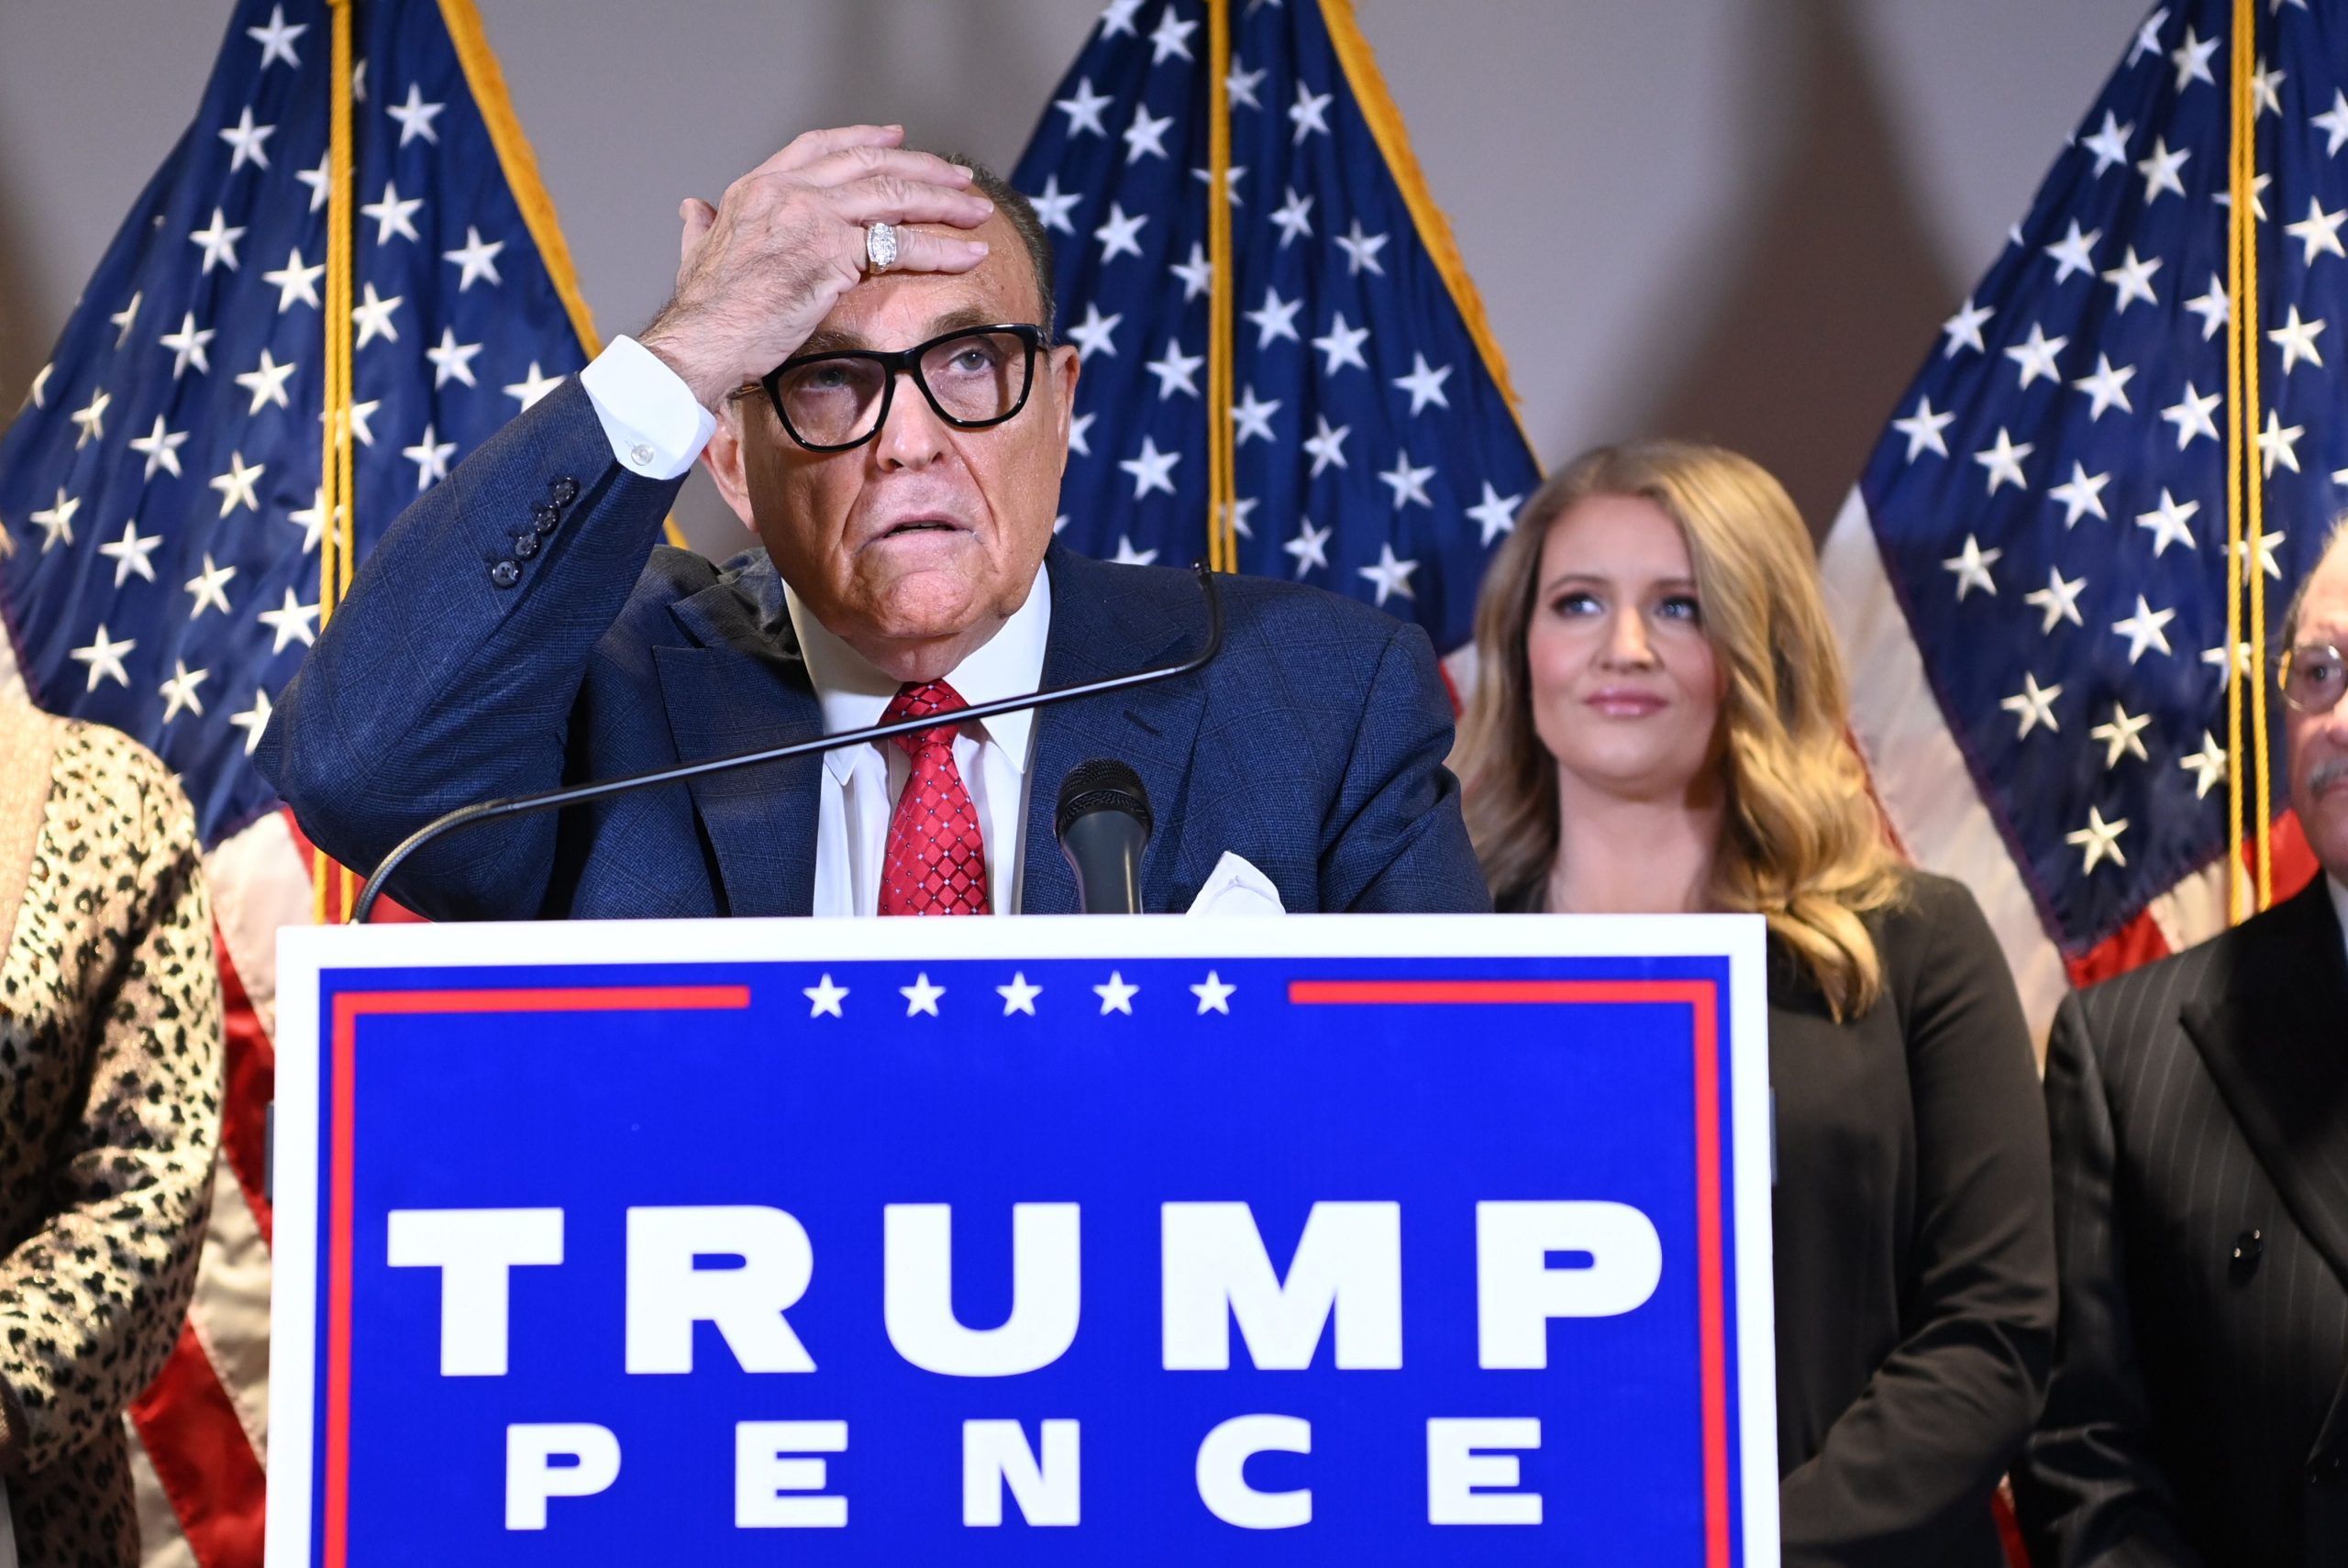 Giuliani quotes "My Cousin Vinny" as he presents conspiracy theories at an odd press conference